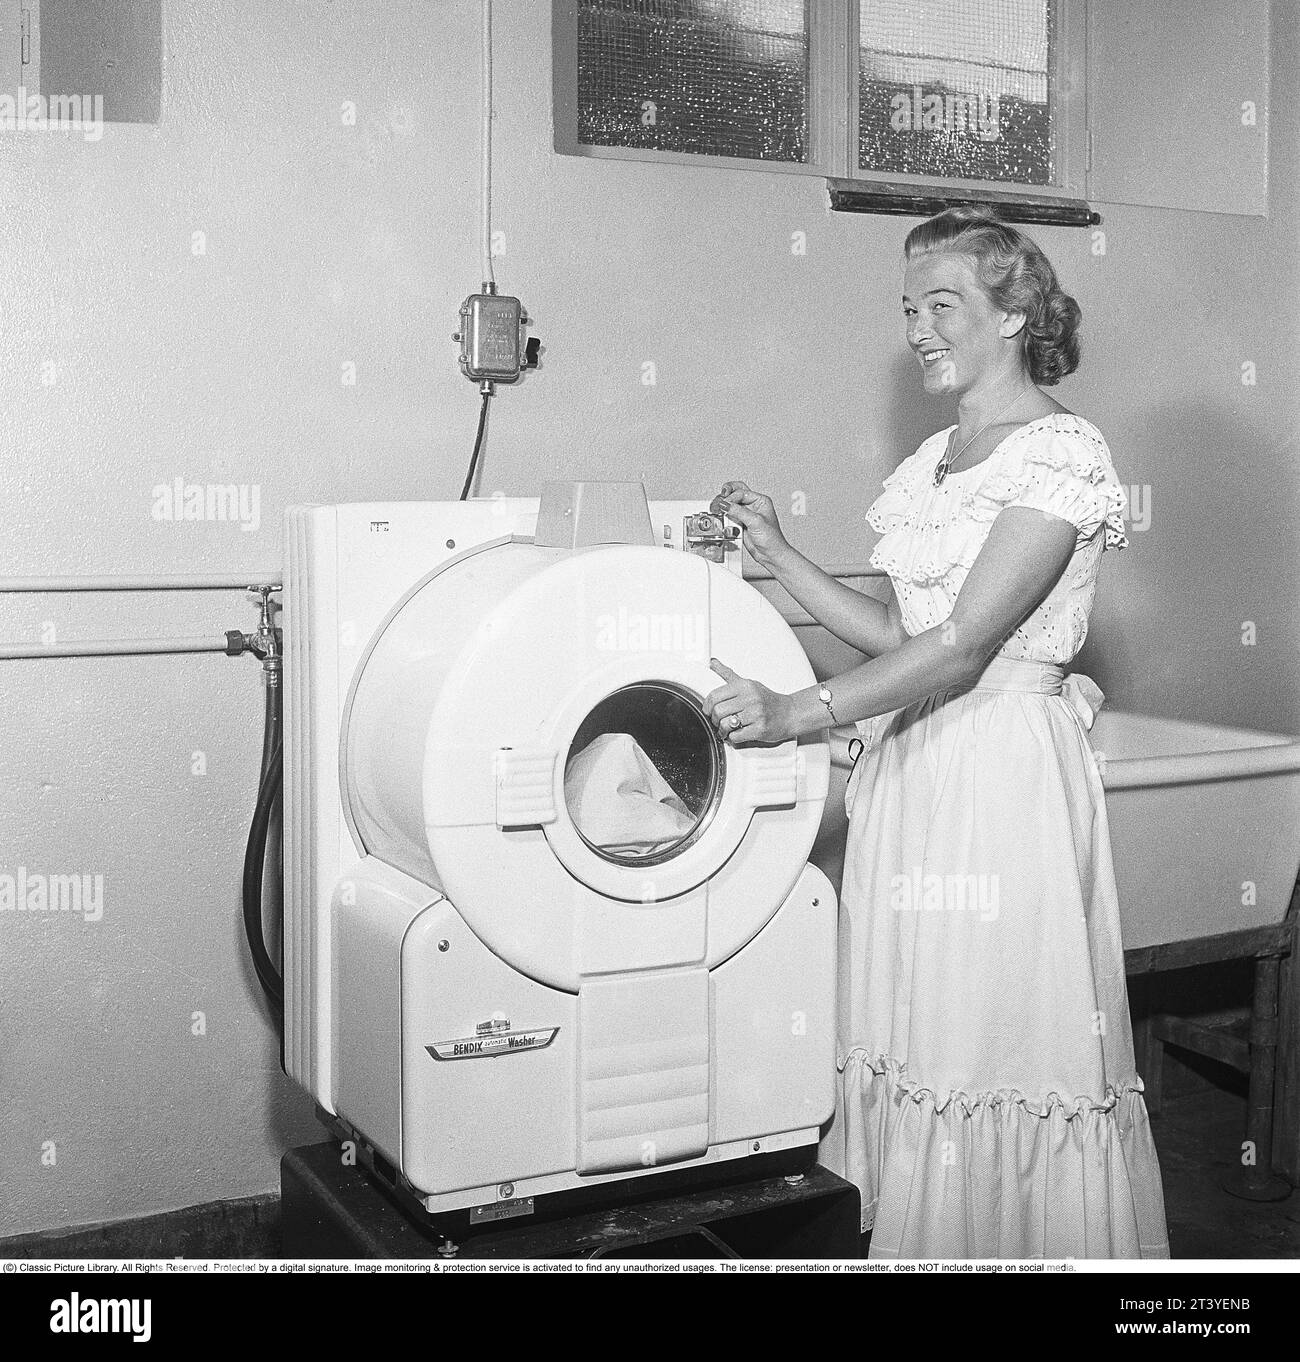 In the 1950s. A young woman at a state-of-the-art American washing machine from the manufacturer Bendix. The model was the first automatic washing machine and was not unlike today's washing machines. Sweden 1950. Kristoffersson ref AZ78-7 Stock Photo